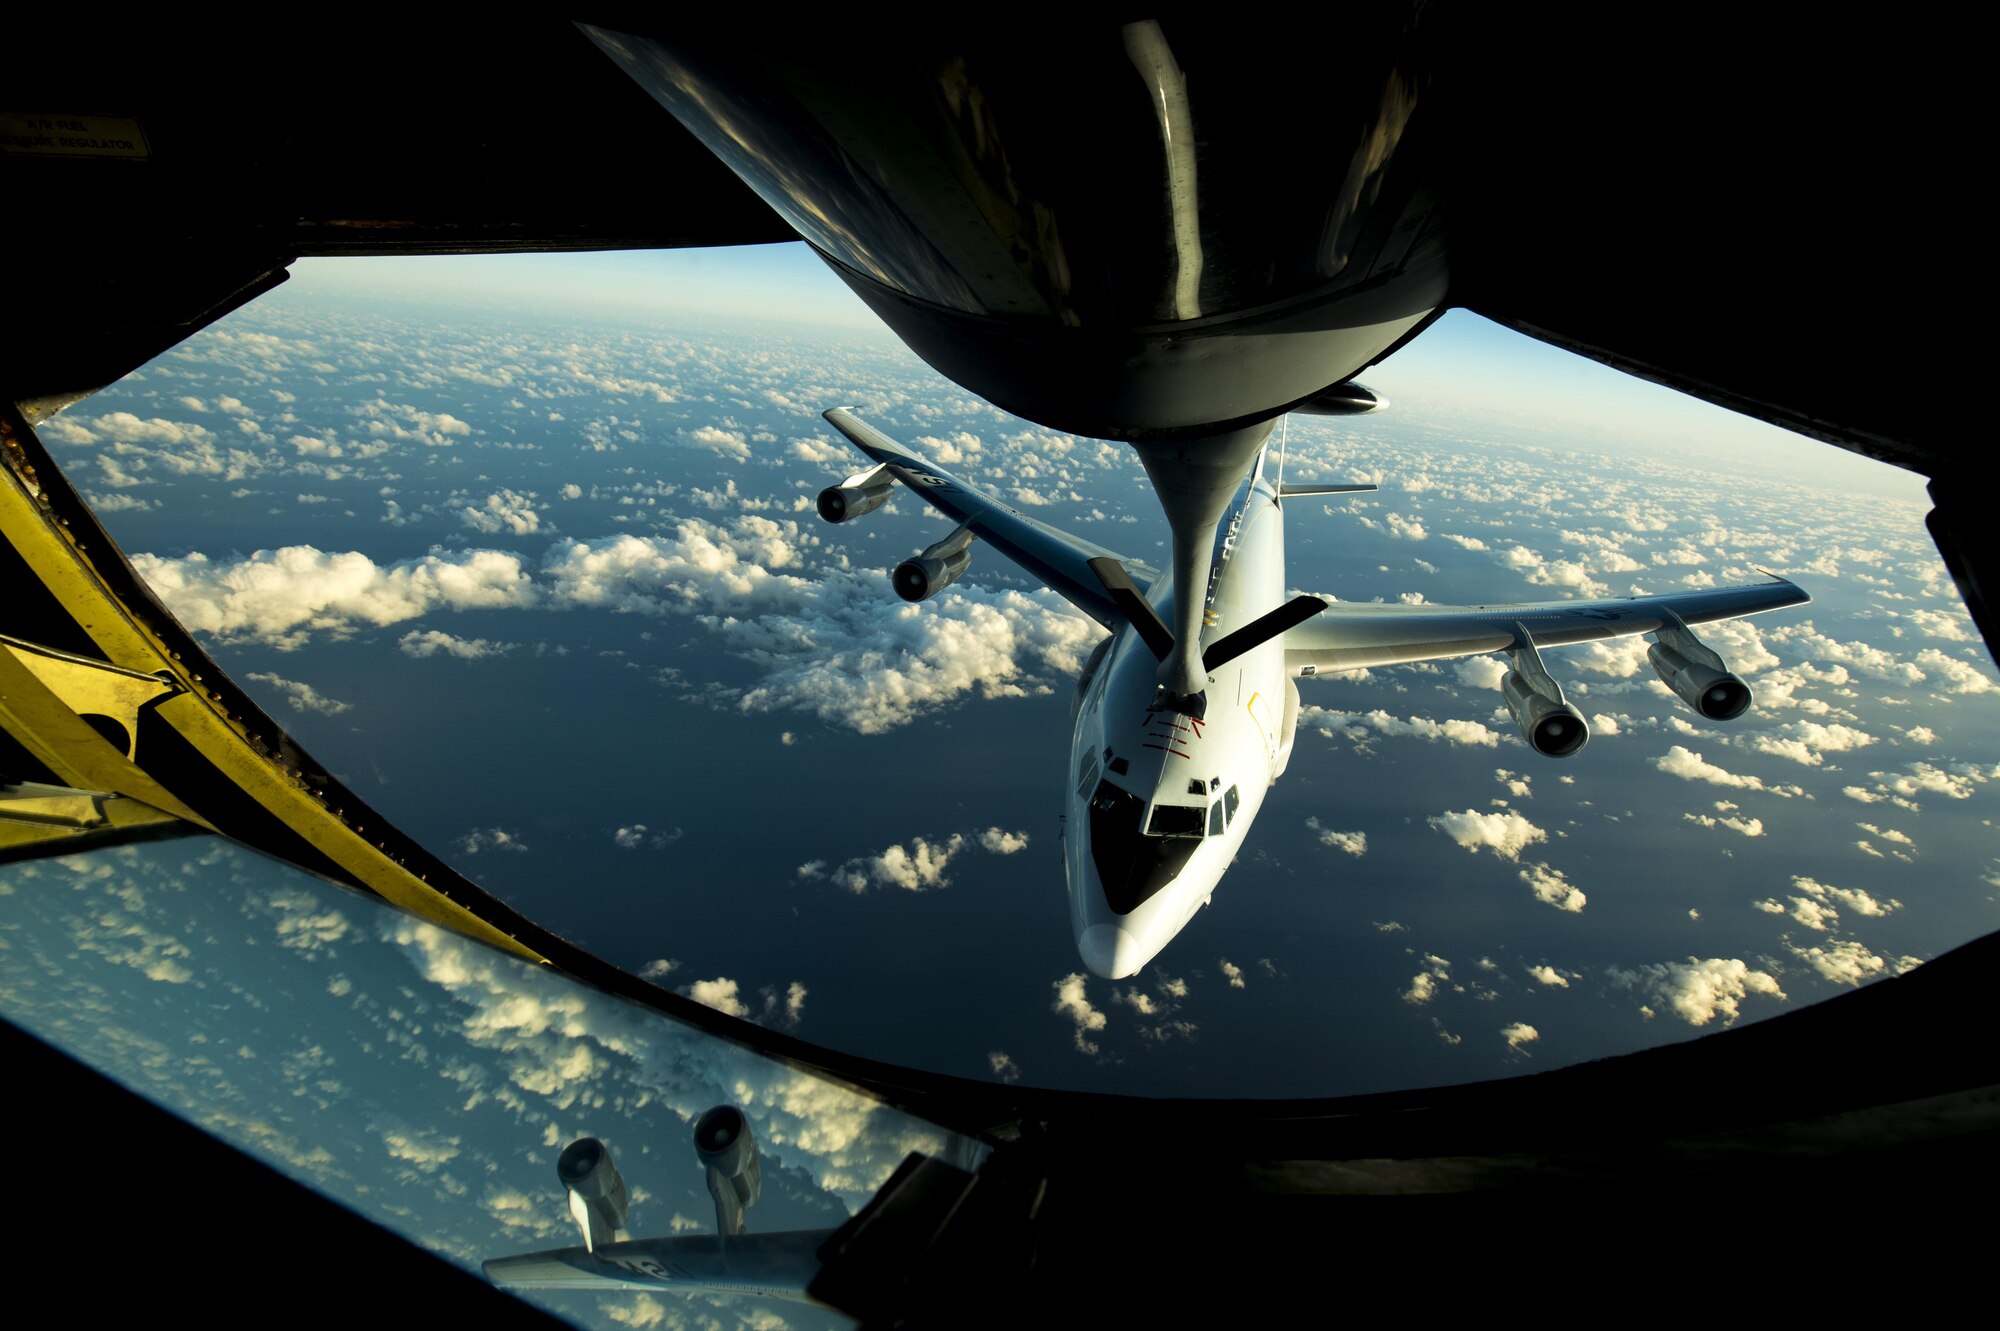 An E-3 Sentry assigned to the 961st Airborne Air Control Squadron receives fuel from the boom pod of a KC-135 Stratotanker assigned to the 909th Aerial Refueling Squadron during Cope North 2017, Feb. 22, 2017. The exercise includes 22 total flying units and more than 2,700 personnel from three countries and continues the growth of strong, interoperable relationships within the Indo-Asia-Pacific region through integration of airborne and land-based command and control assets. (U.S. Air Force photo by Senior Airman Keith James)